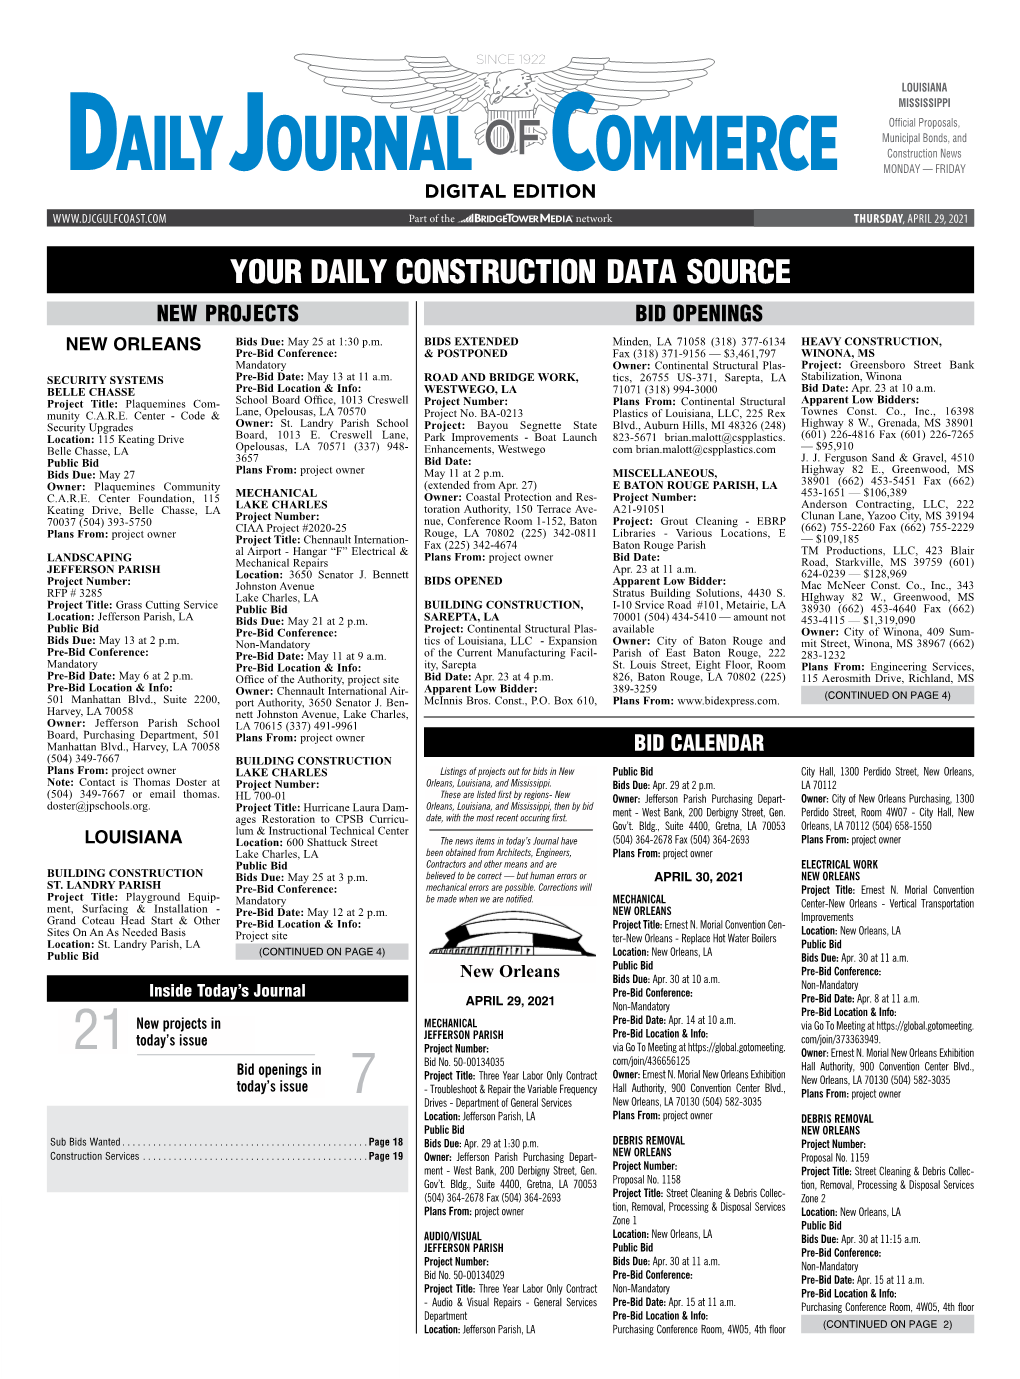 YOUR DAILY CONSTRUCTION DATA SOURCE NEW PROJECTS BID OPENINGS NEW ORLEANS Bids Due: May 25 at 1:30 P.M